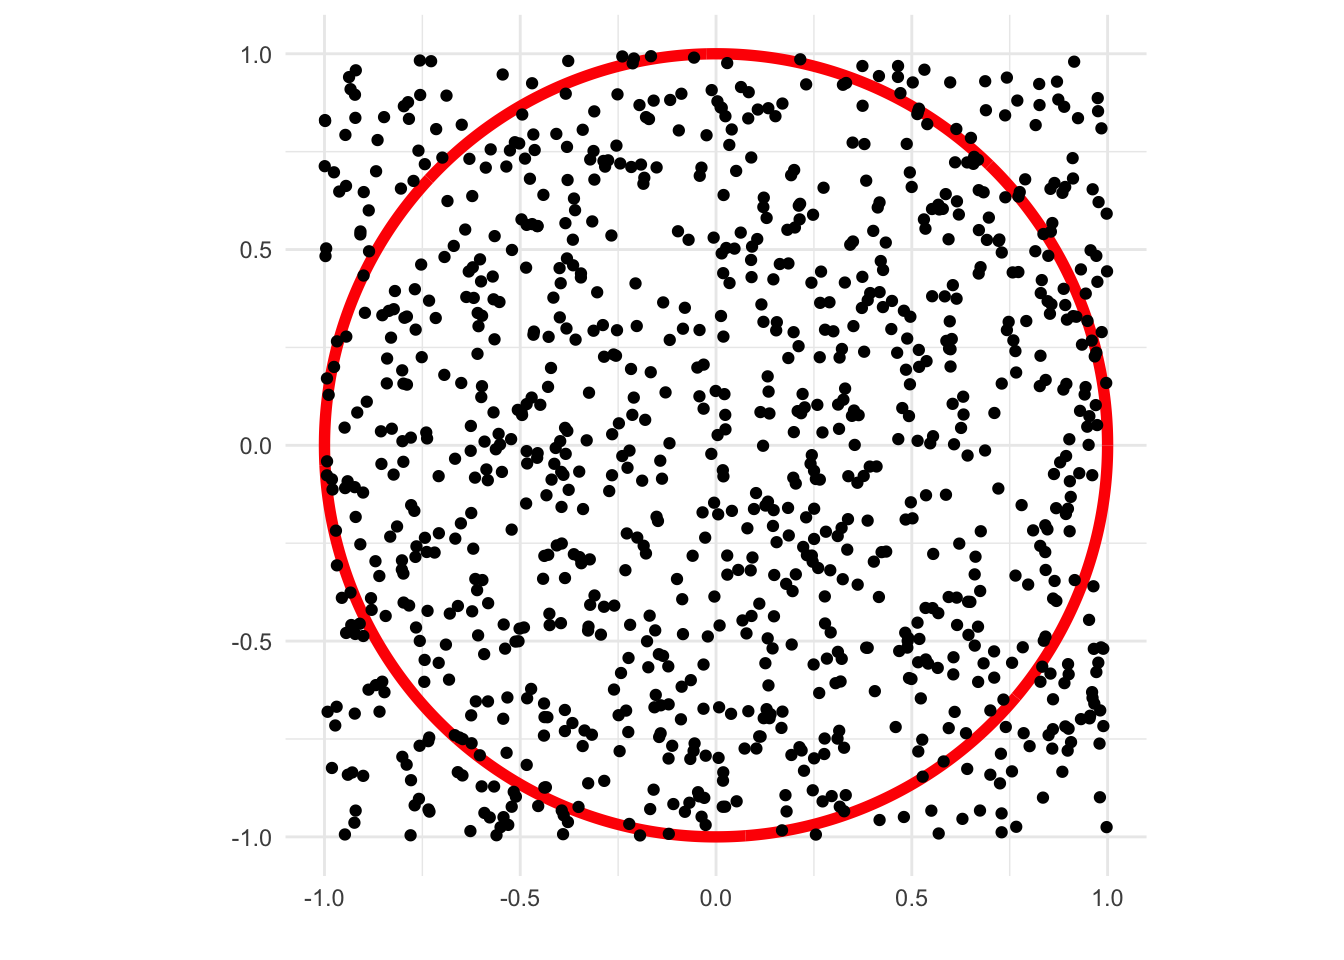 Points randomly located on [-1,1] x [-1,1], with the unit circle overlaid.